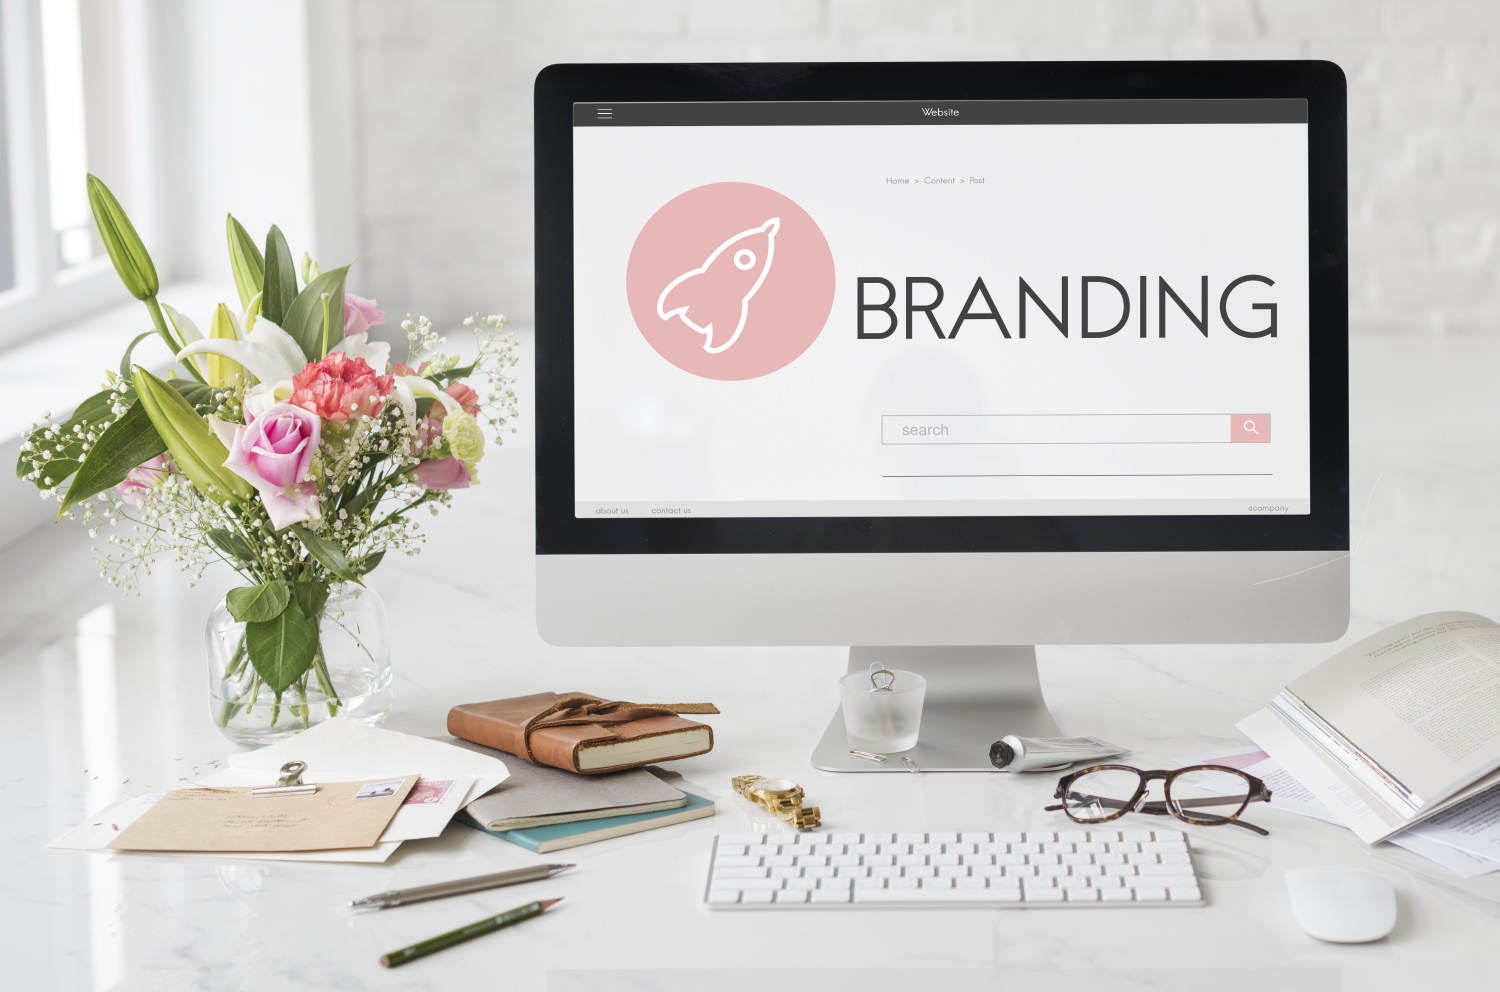 BSPOKE Design - Branding for a company and business website, what can go wrong